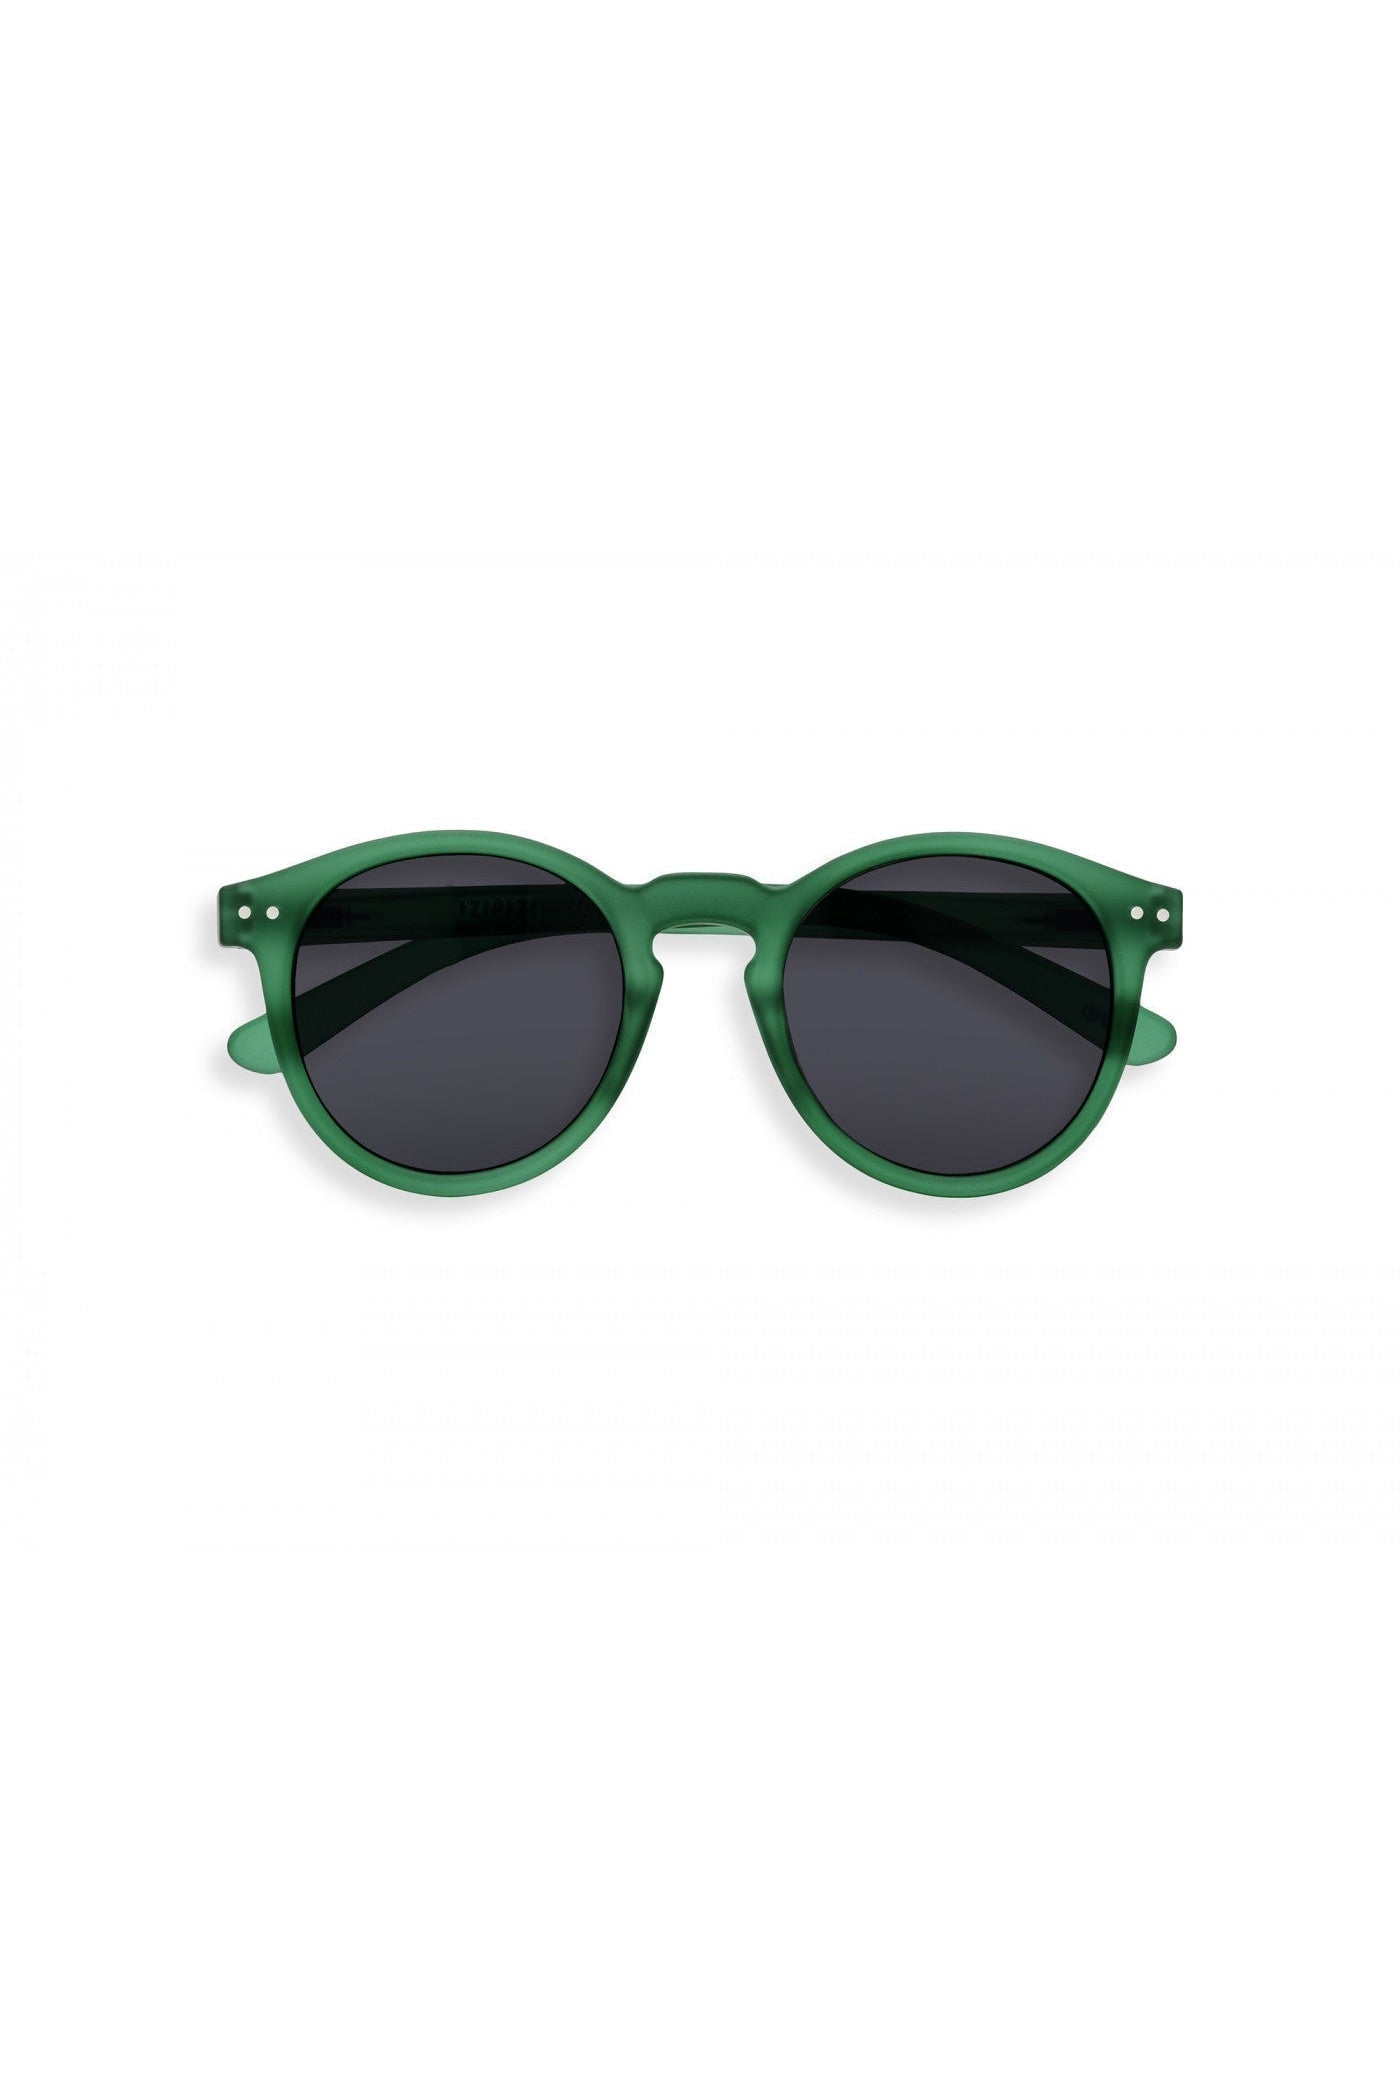 Izipizi # M Sunglasses in Green Crystal-Accessories-Ohh! By Gum - Shop Sustainable